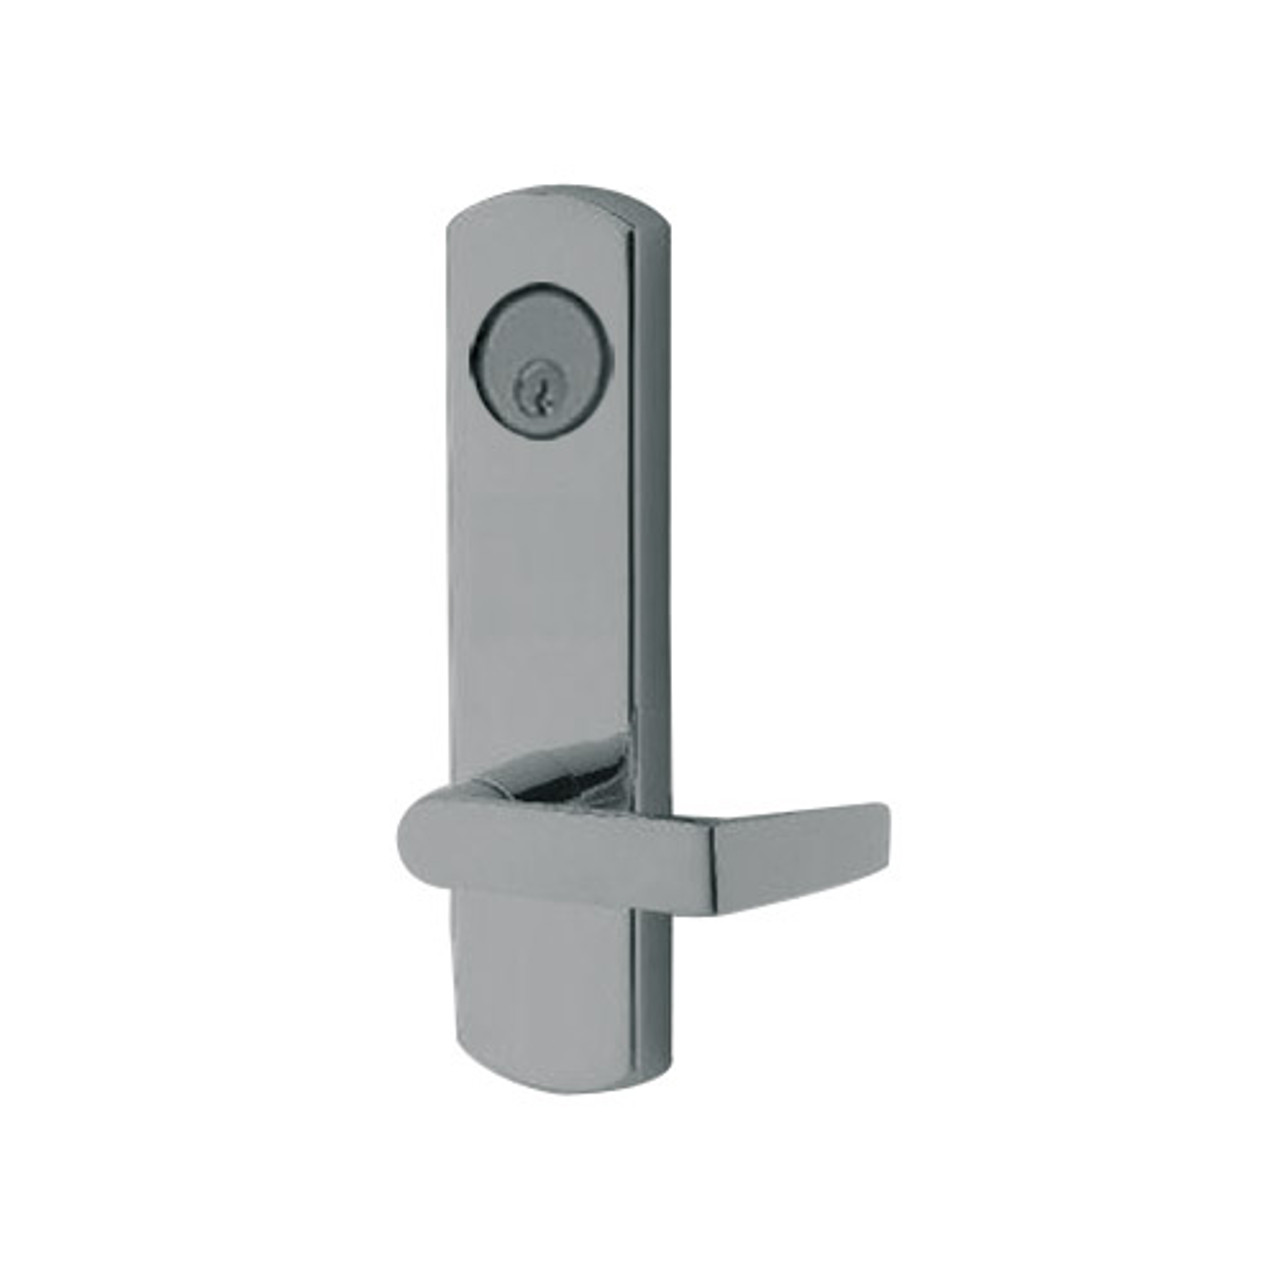 3080E-03-0-96-35 US32D Adams Rite Electrified Entry Trim with Square Lever in Satin Stainless Finish